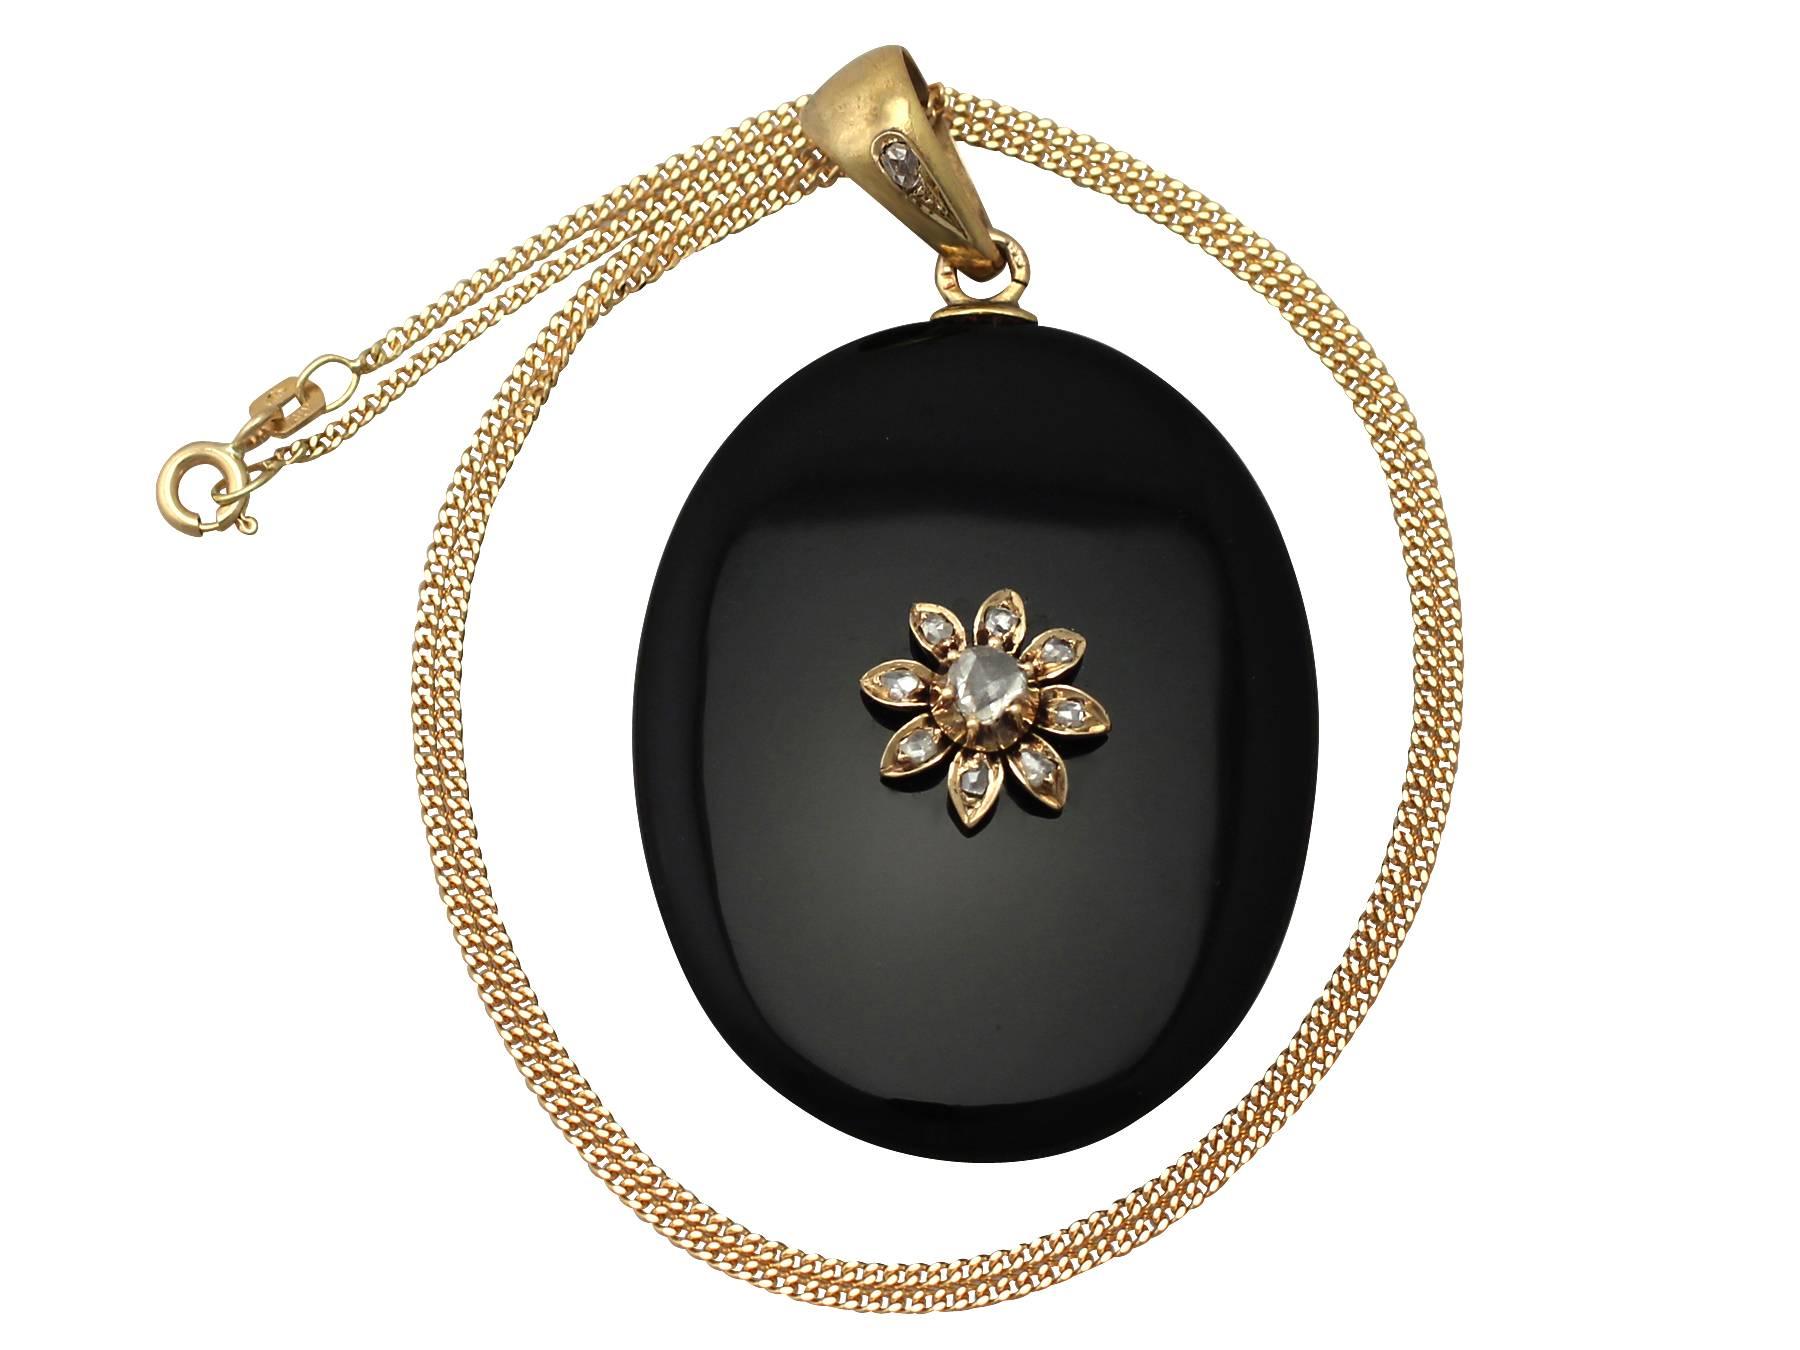 A fine and impressive antique Victorian onyx and 0.49 carat diamond, 14 karat yellow gold pendant /locket; part of our antique jewelry and estate jewelry collections

This substantial antique Victorian pendant has been crafted in onyx.

The anterior